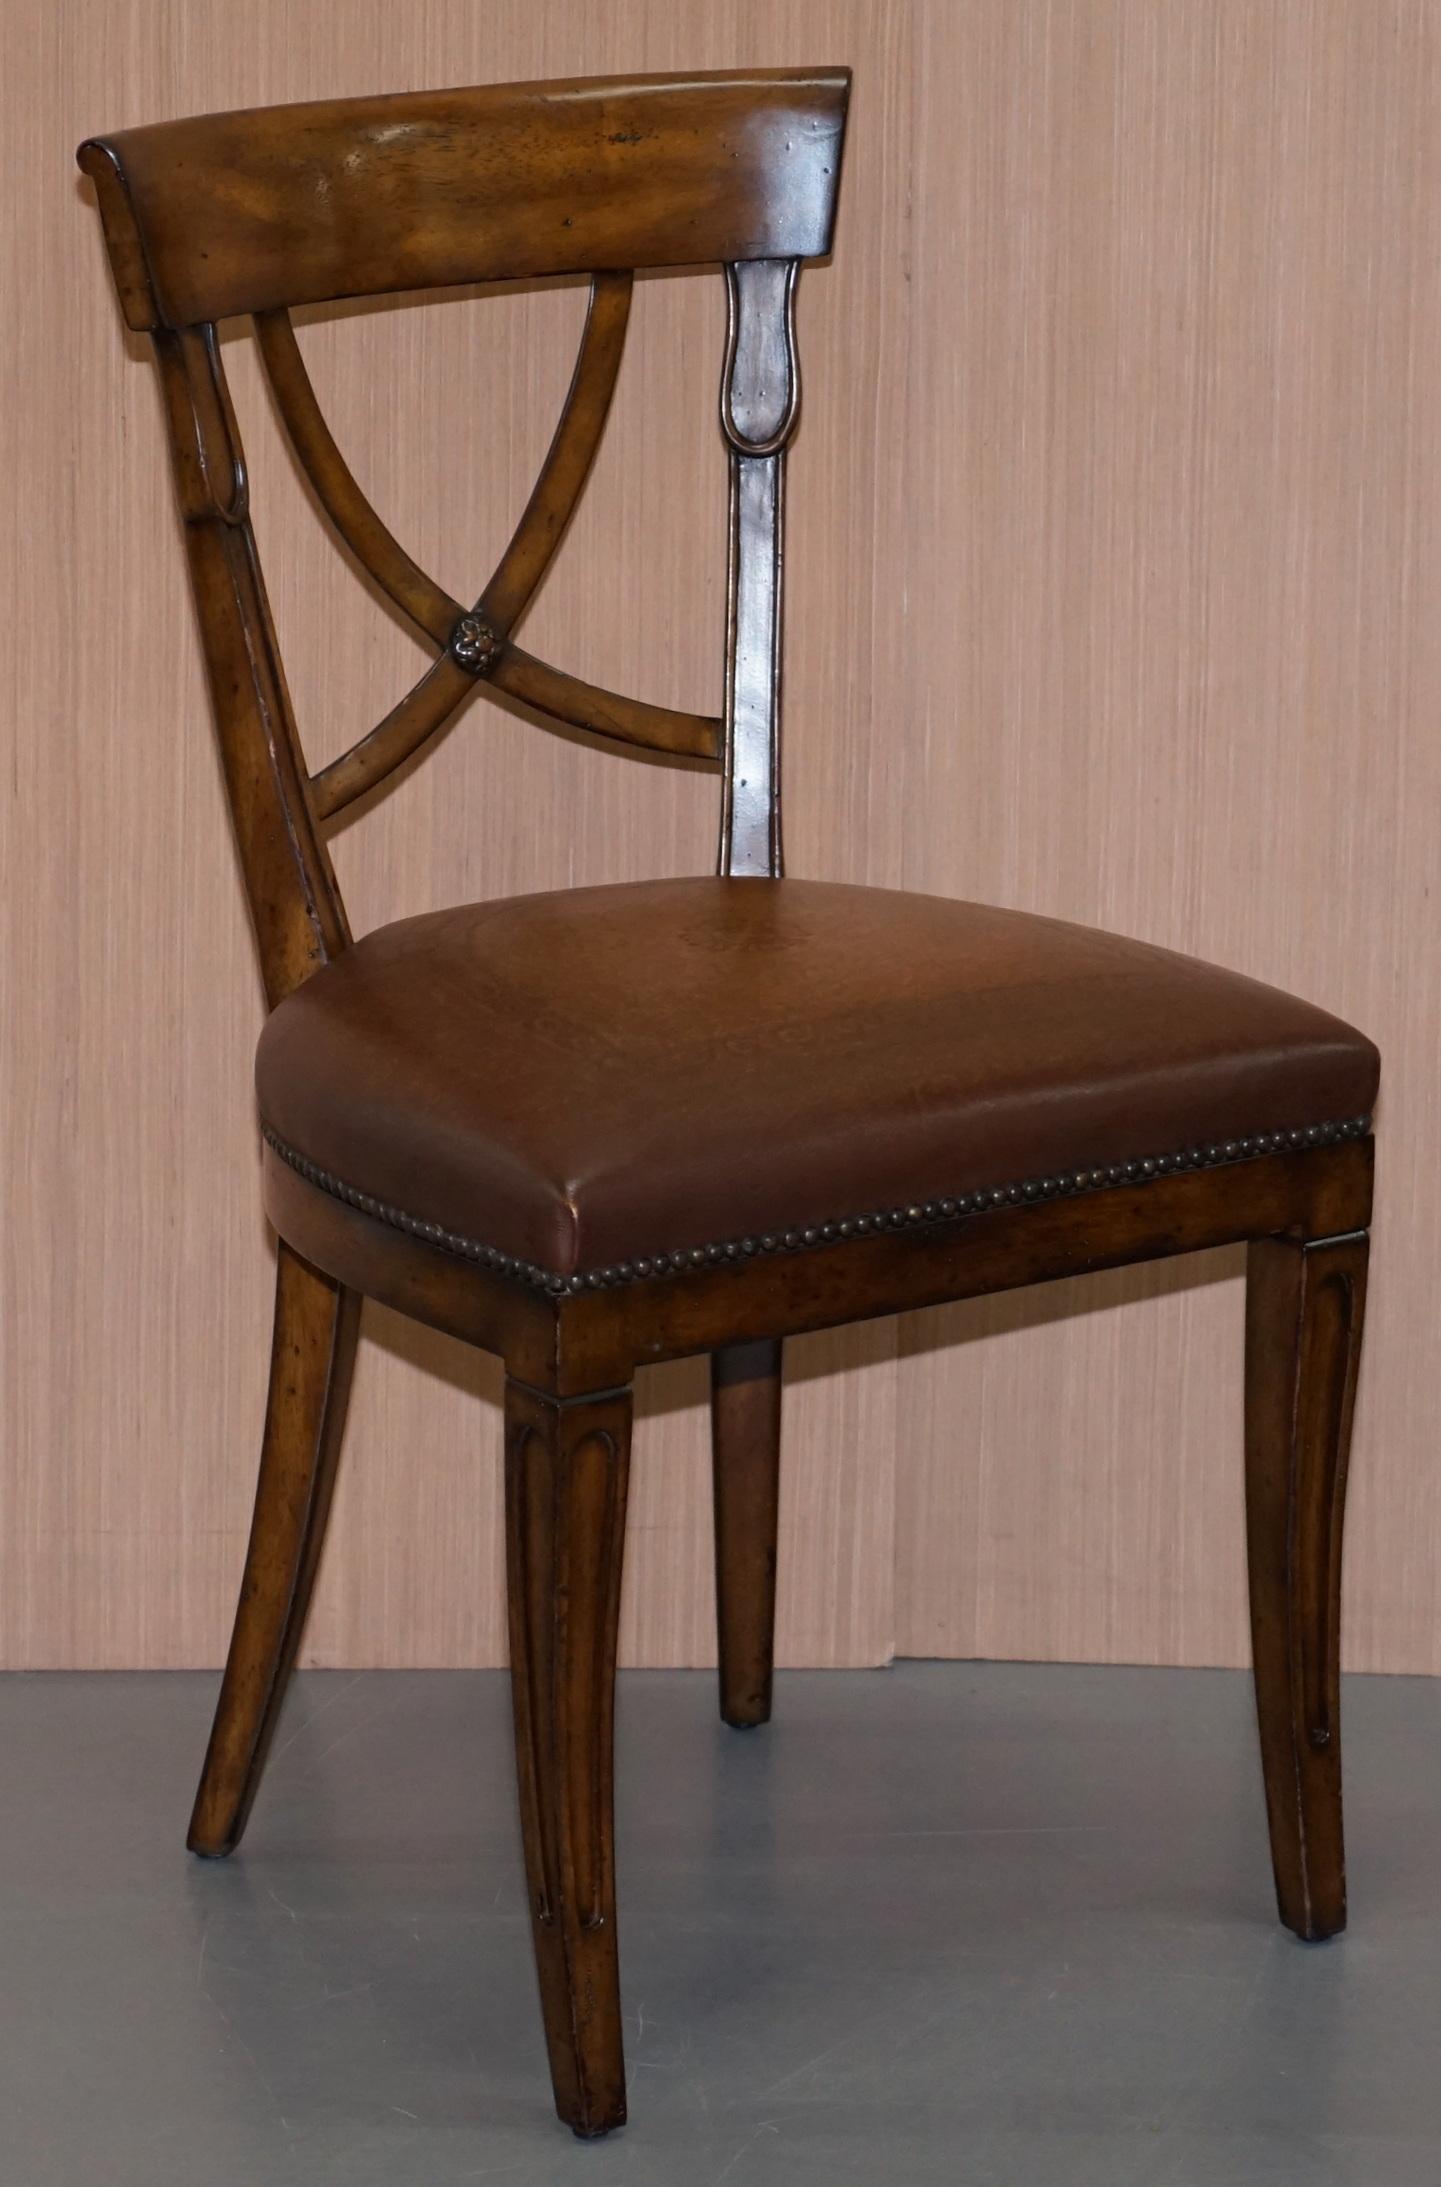 We are delighted to offer for sale this stunning set of five RRP £5500 brown leather Regency style Theodore Alexander dining chairs

A very good looking and well made set, they have the Theodore Alexander custom embossed leather to the seat top.